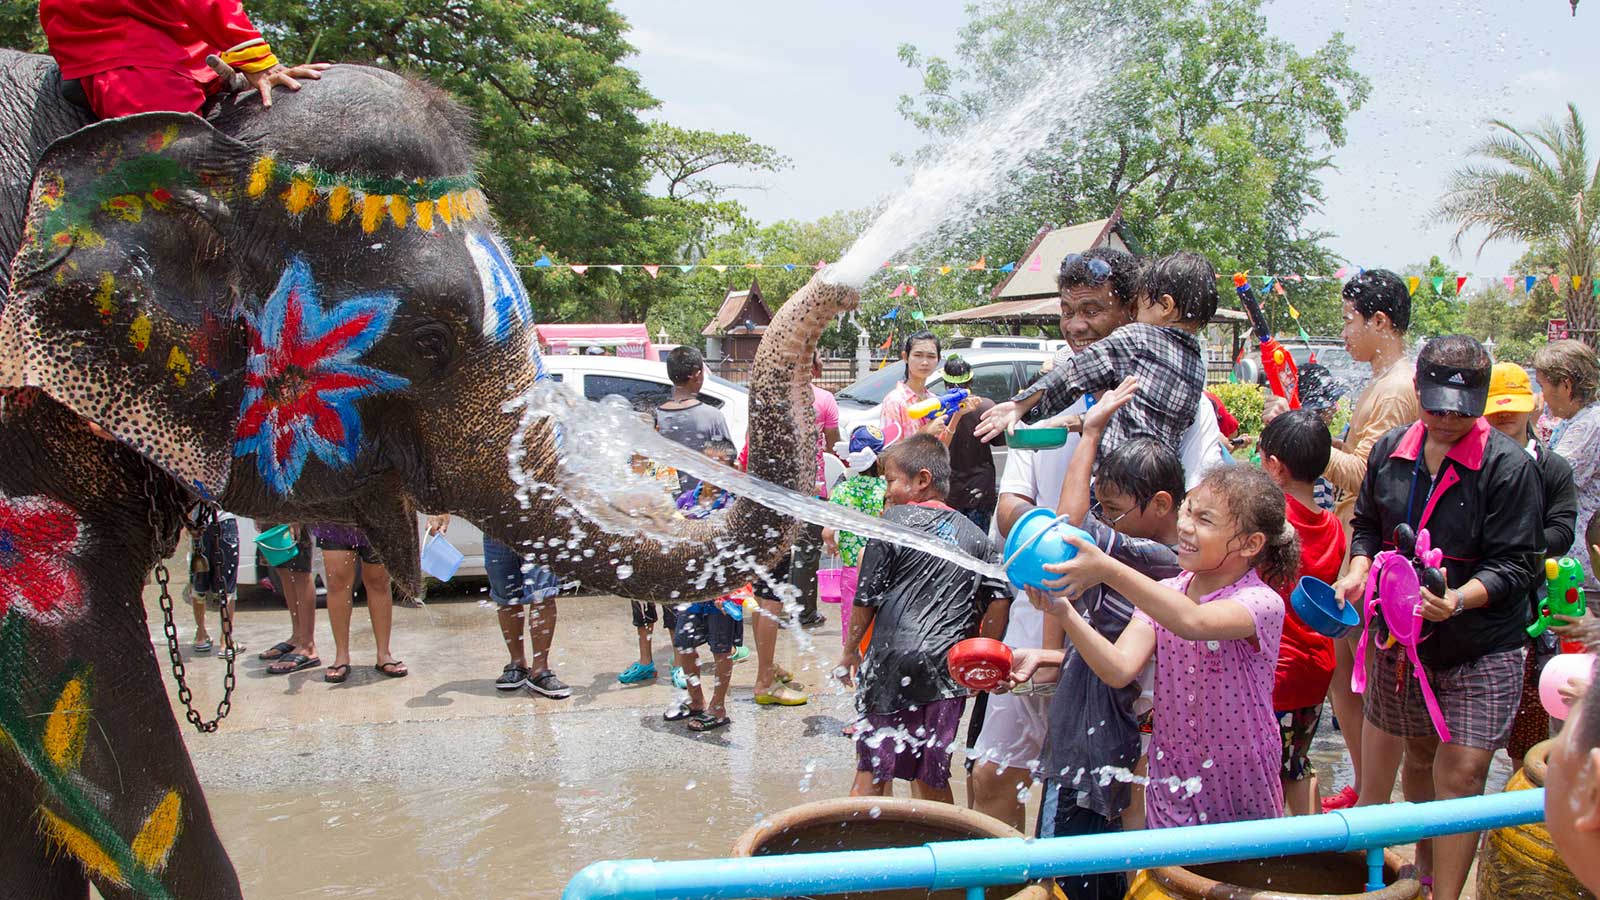 little girl spraying water at decorated elephant for songkran in thailand